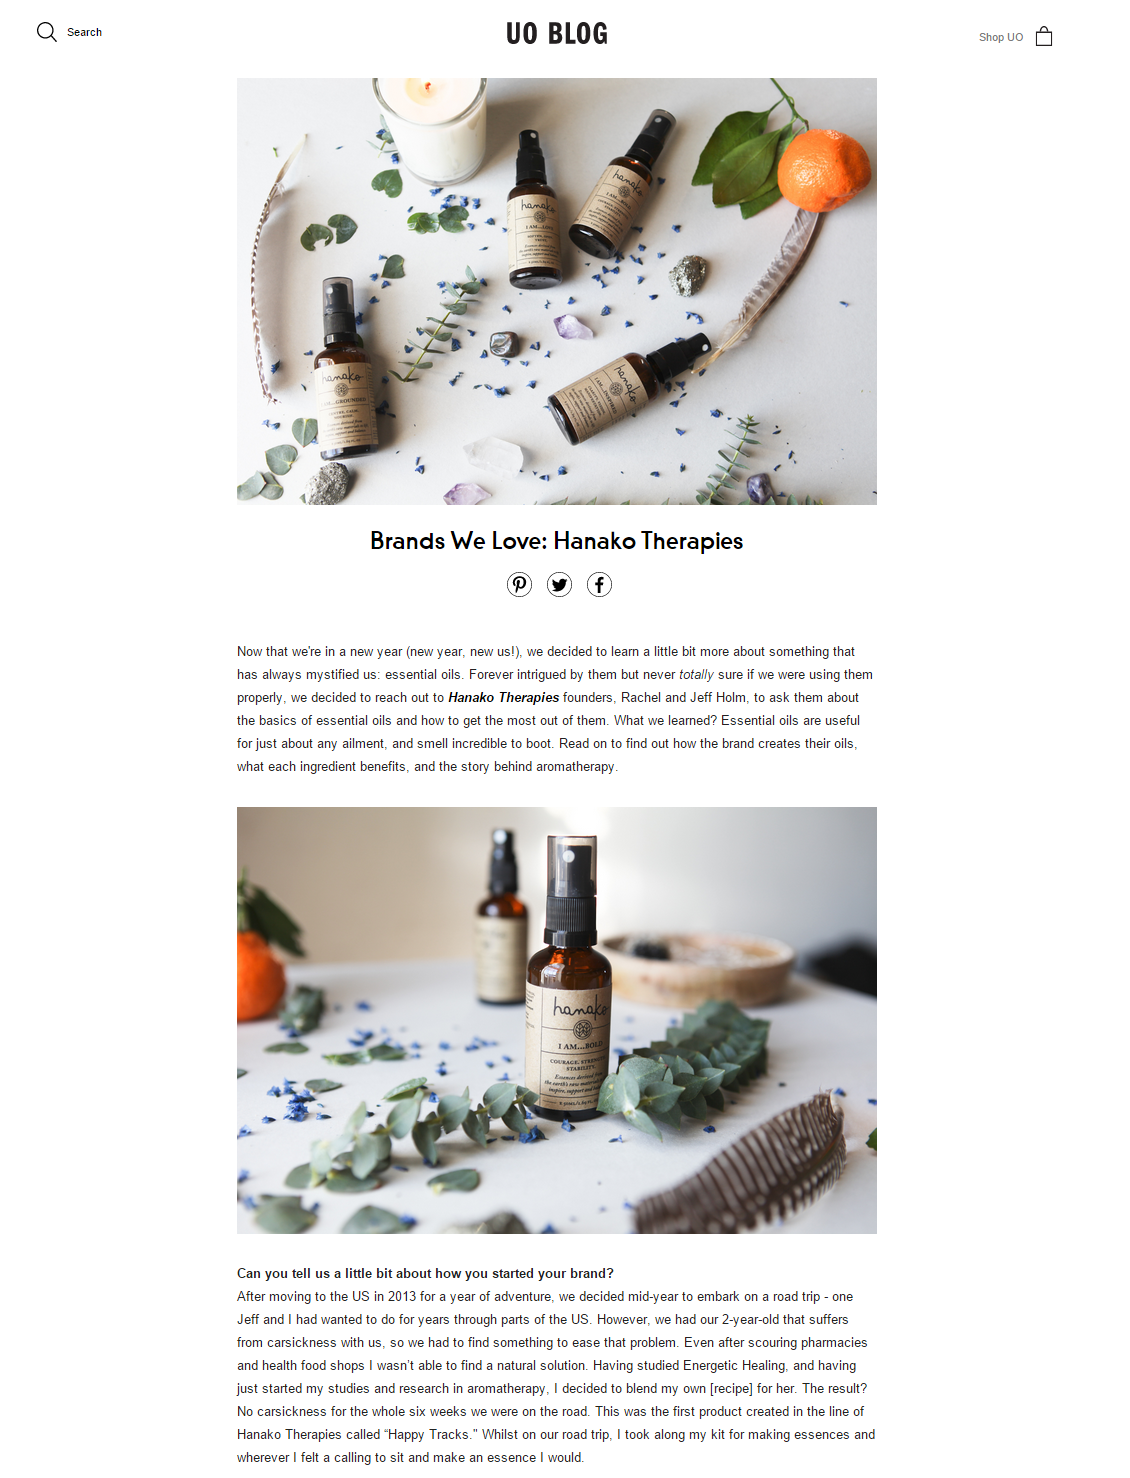 Hanako Therapies featured in Urban Outfitters